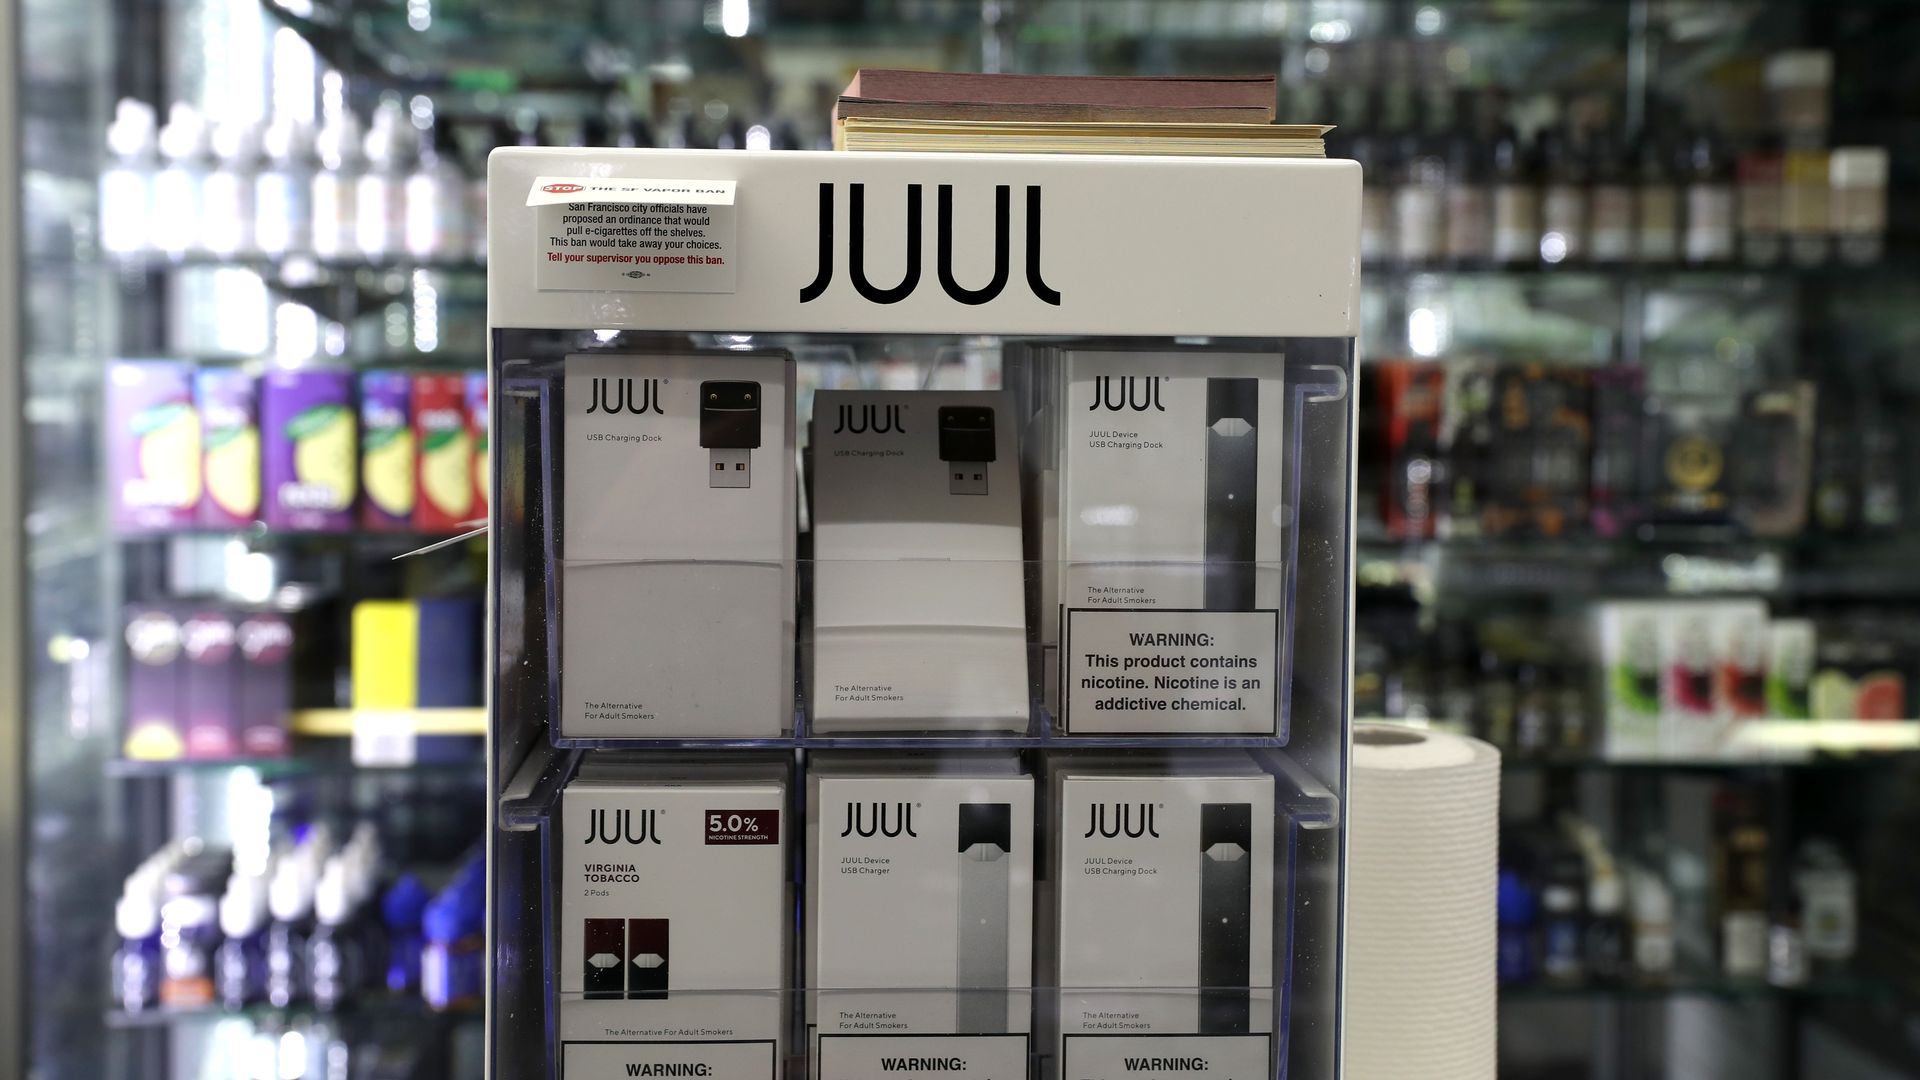  E-Cigarettes made by Juul are displayed at Smoke and Gift Shop on June 25, 2019 in San Francisco